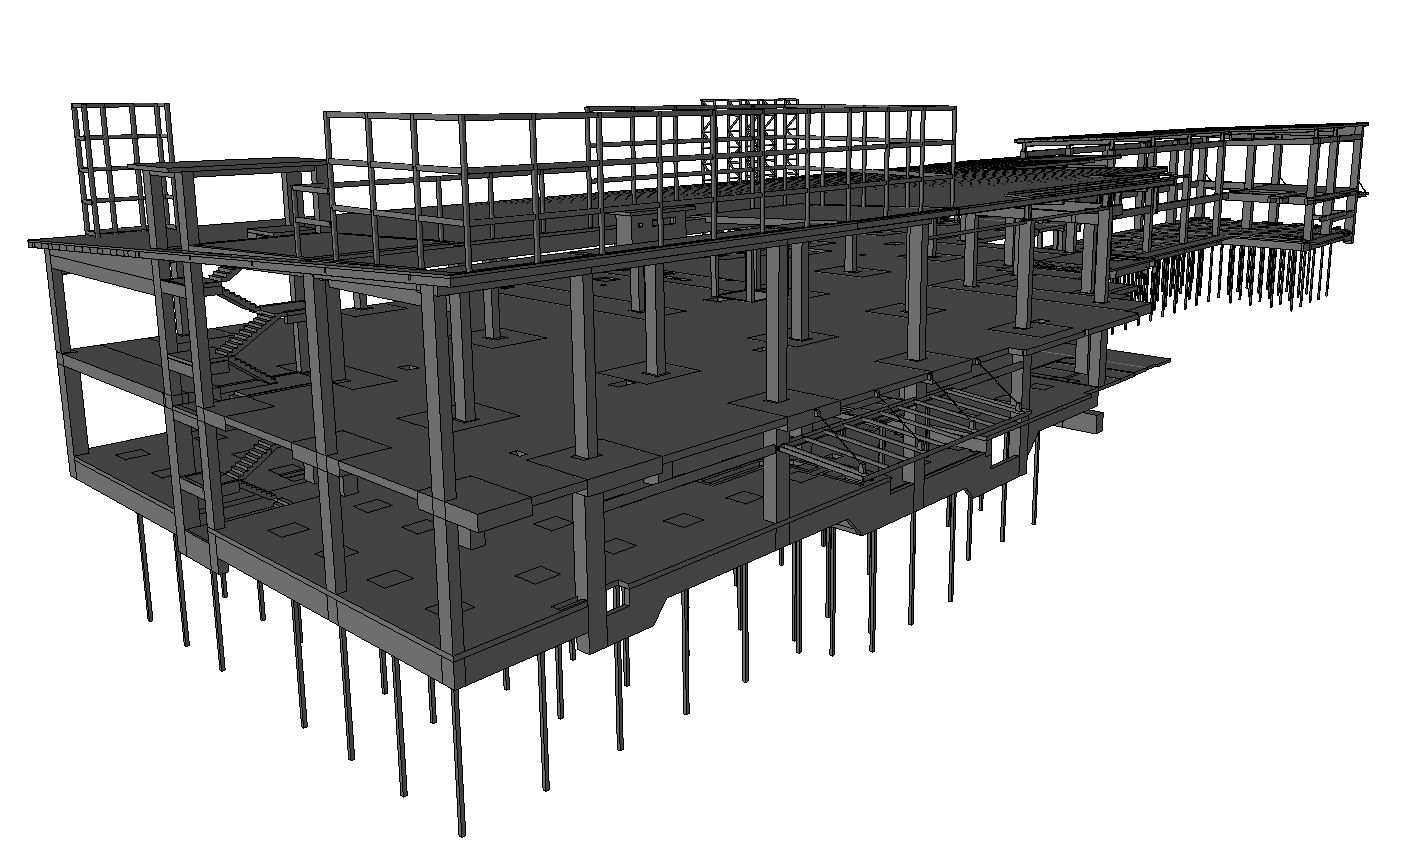 Super Structural Sub Structural BIM coordination and modelling service